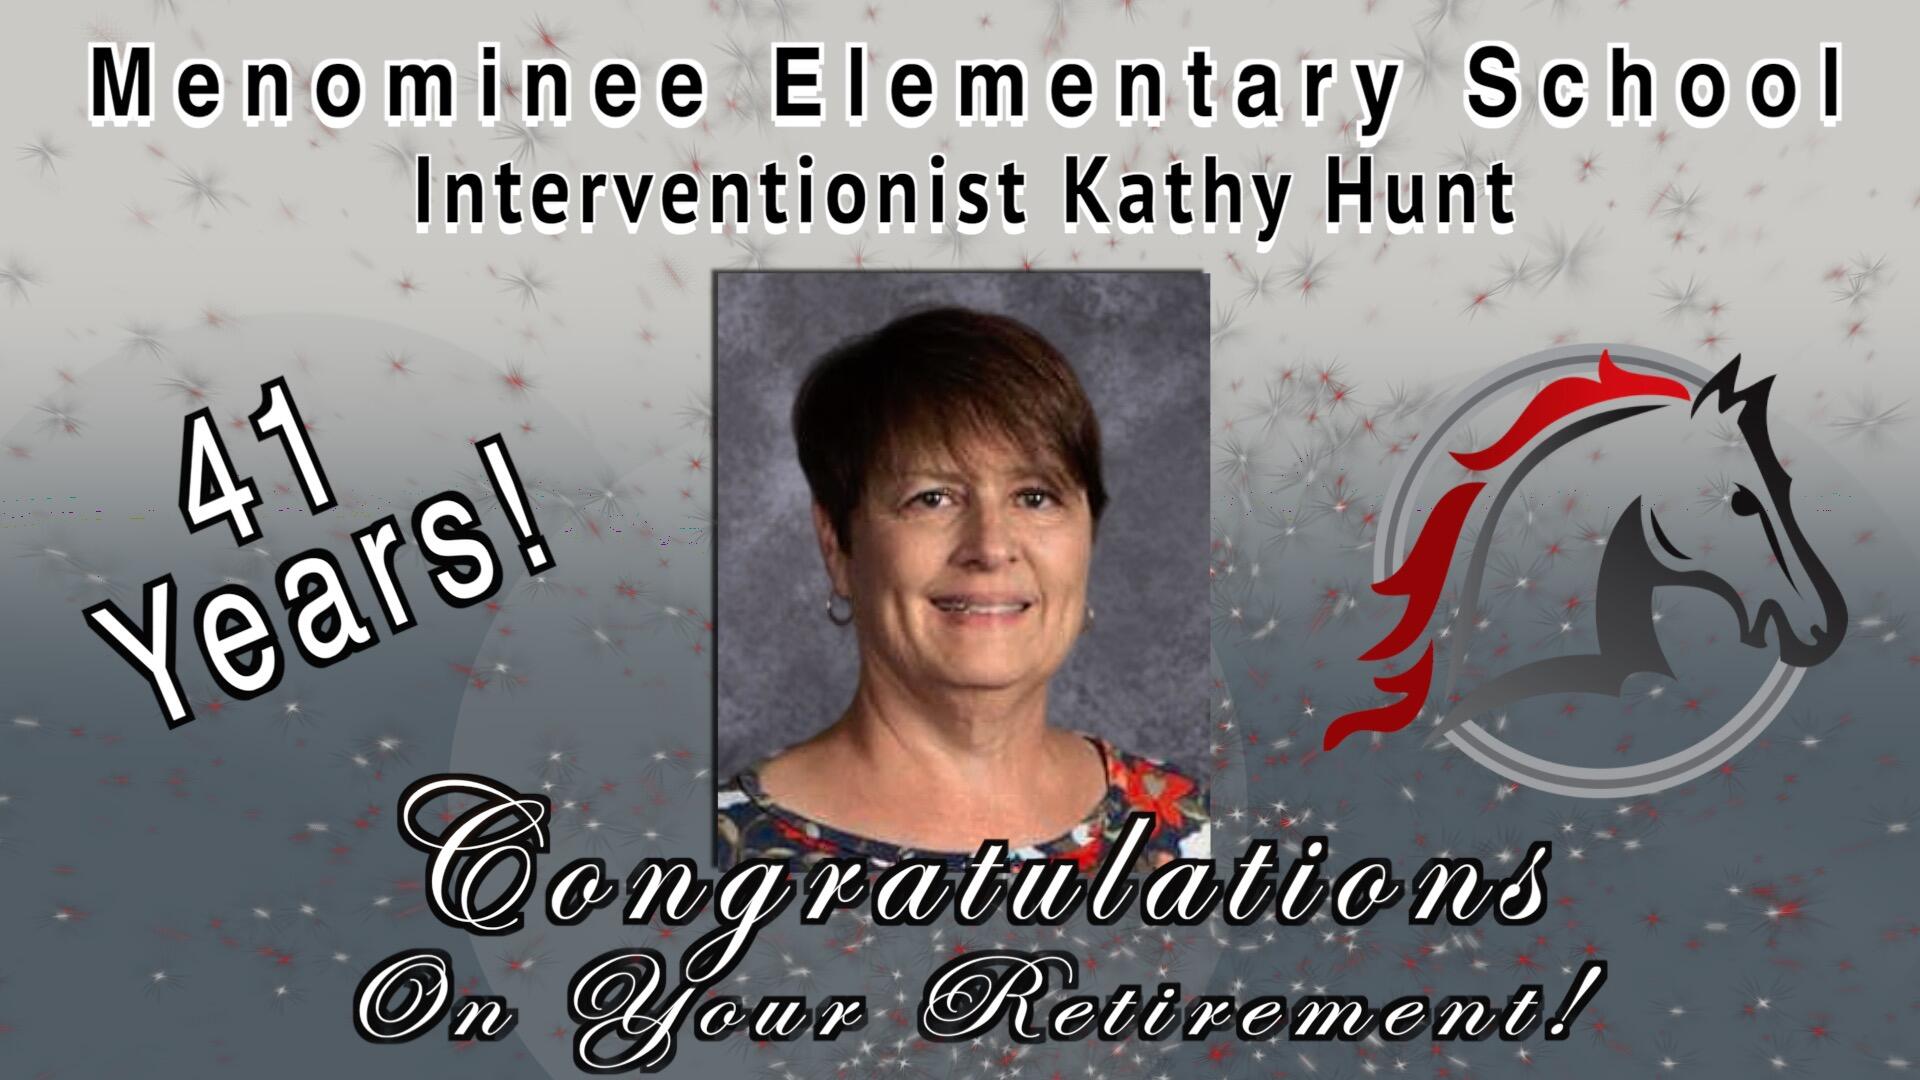 Menominee Elementary School Interventionist Kathy Hunt-41 years! Congratulations On Your Retirement! with photo and Menominee mustang logo